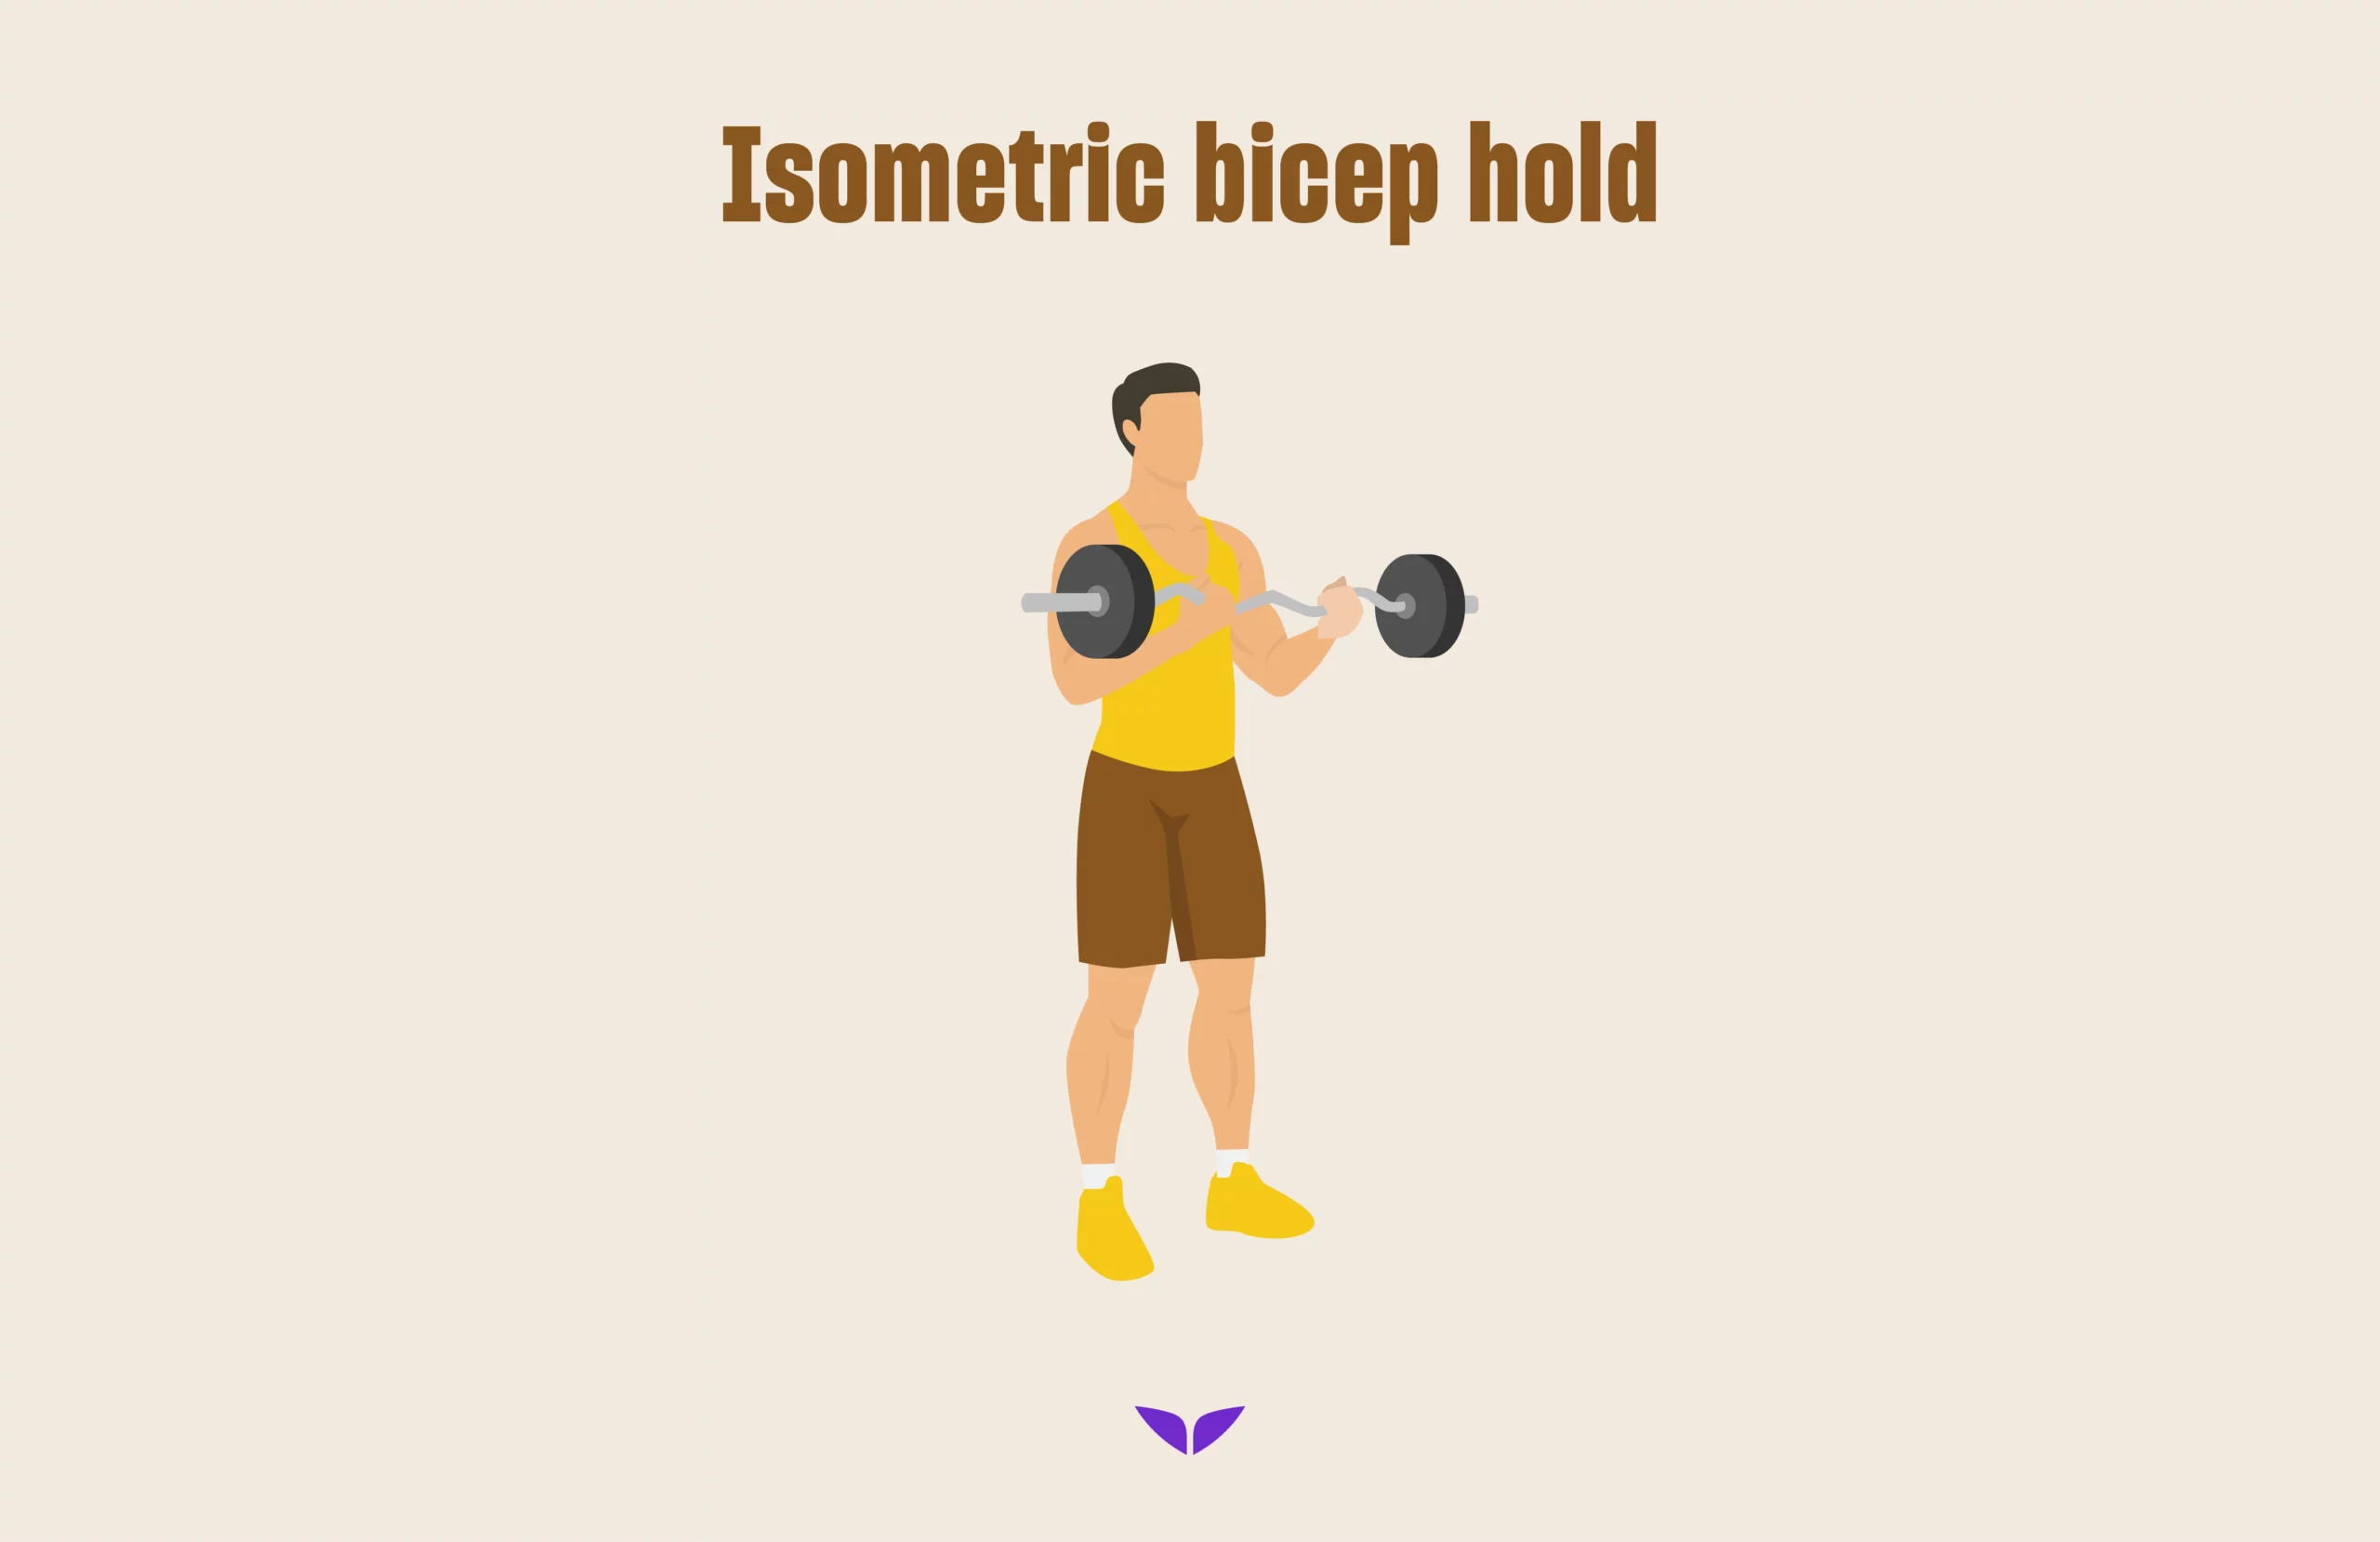 Isometric bicep hold